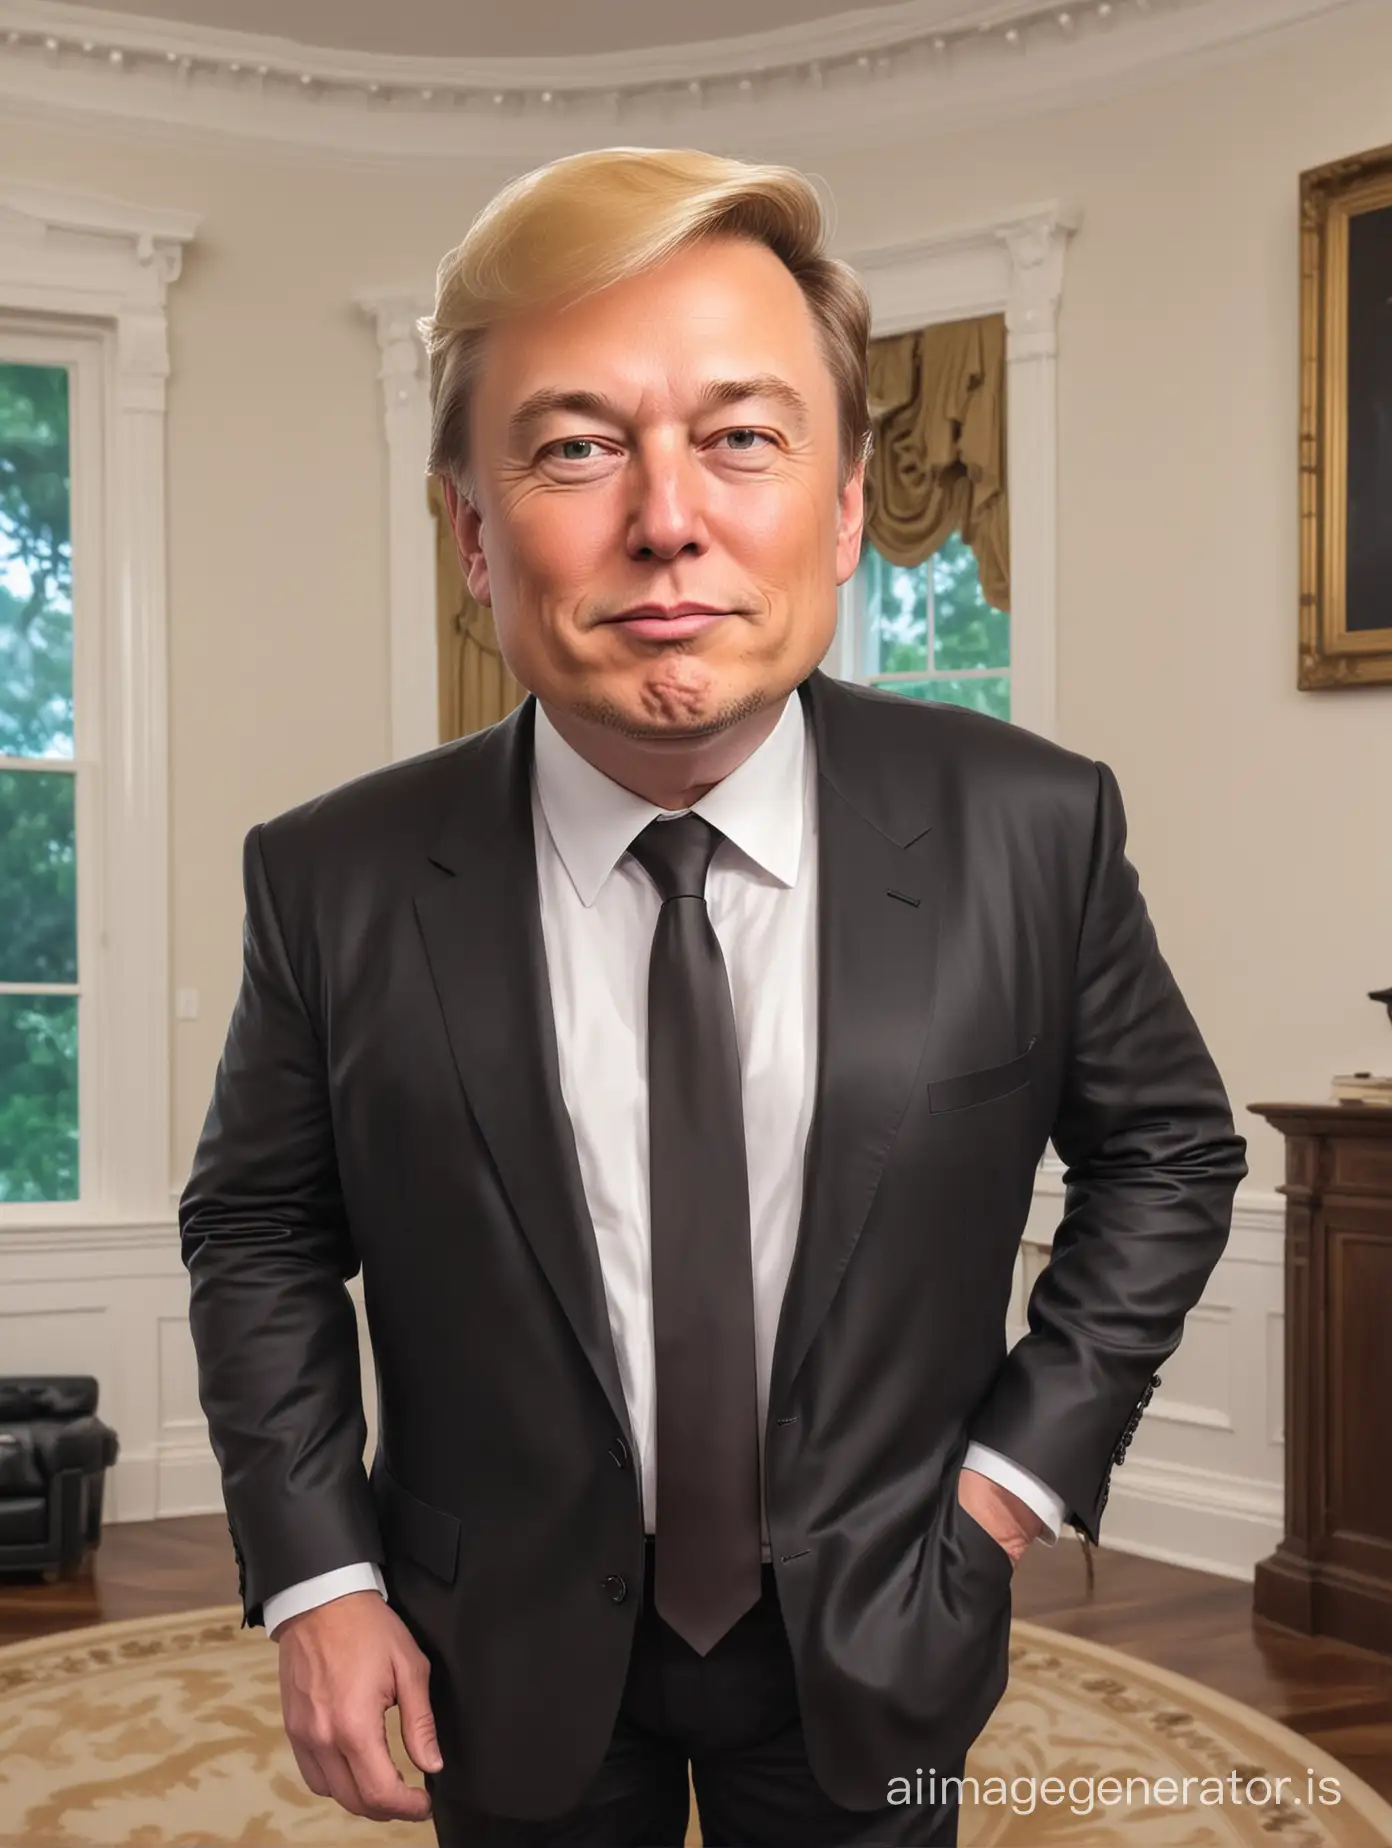 Elon Musk with Donald Trump’s hair, cartoon caricature style, Inside the White House, full body